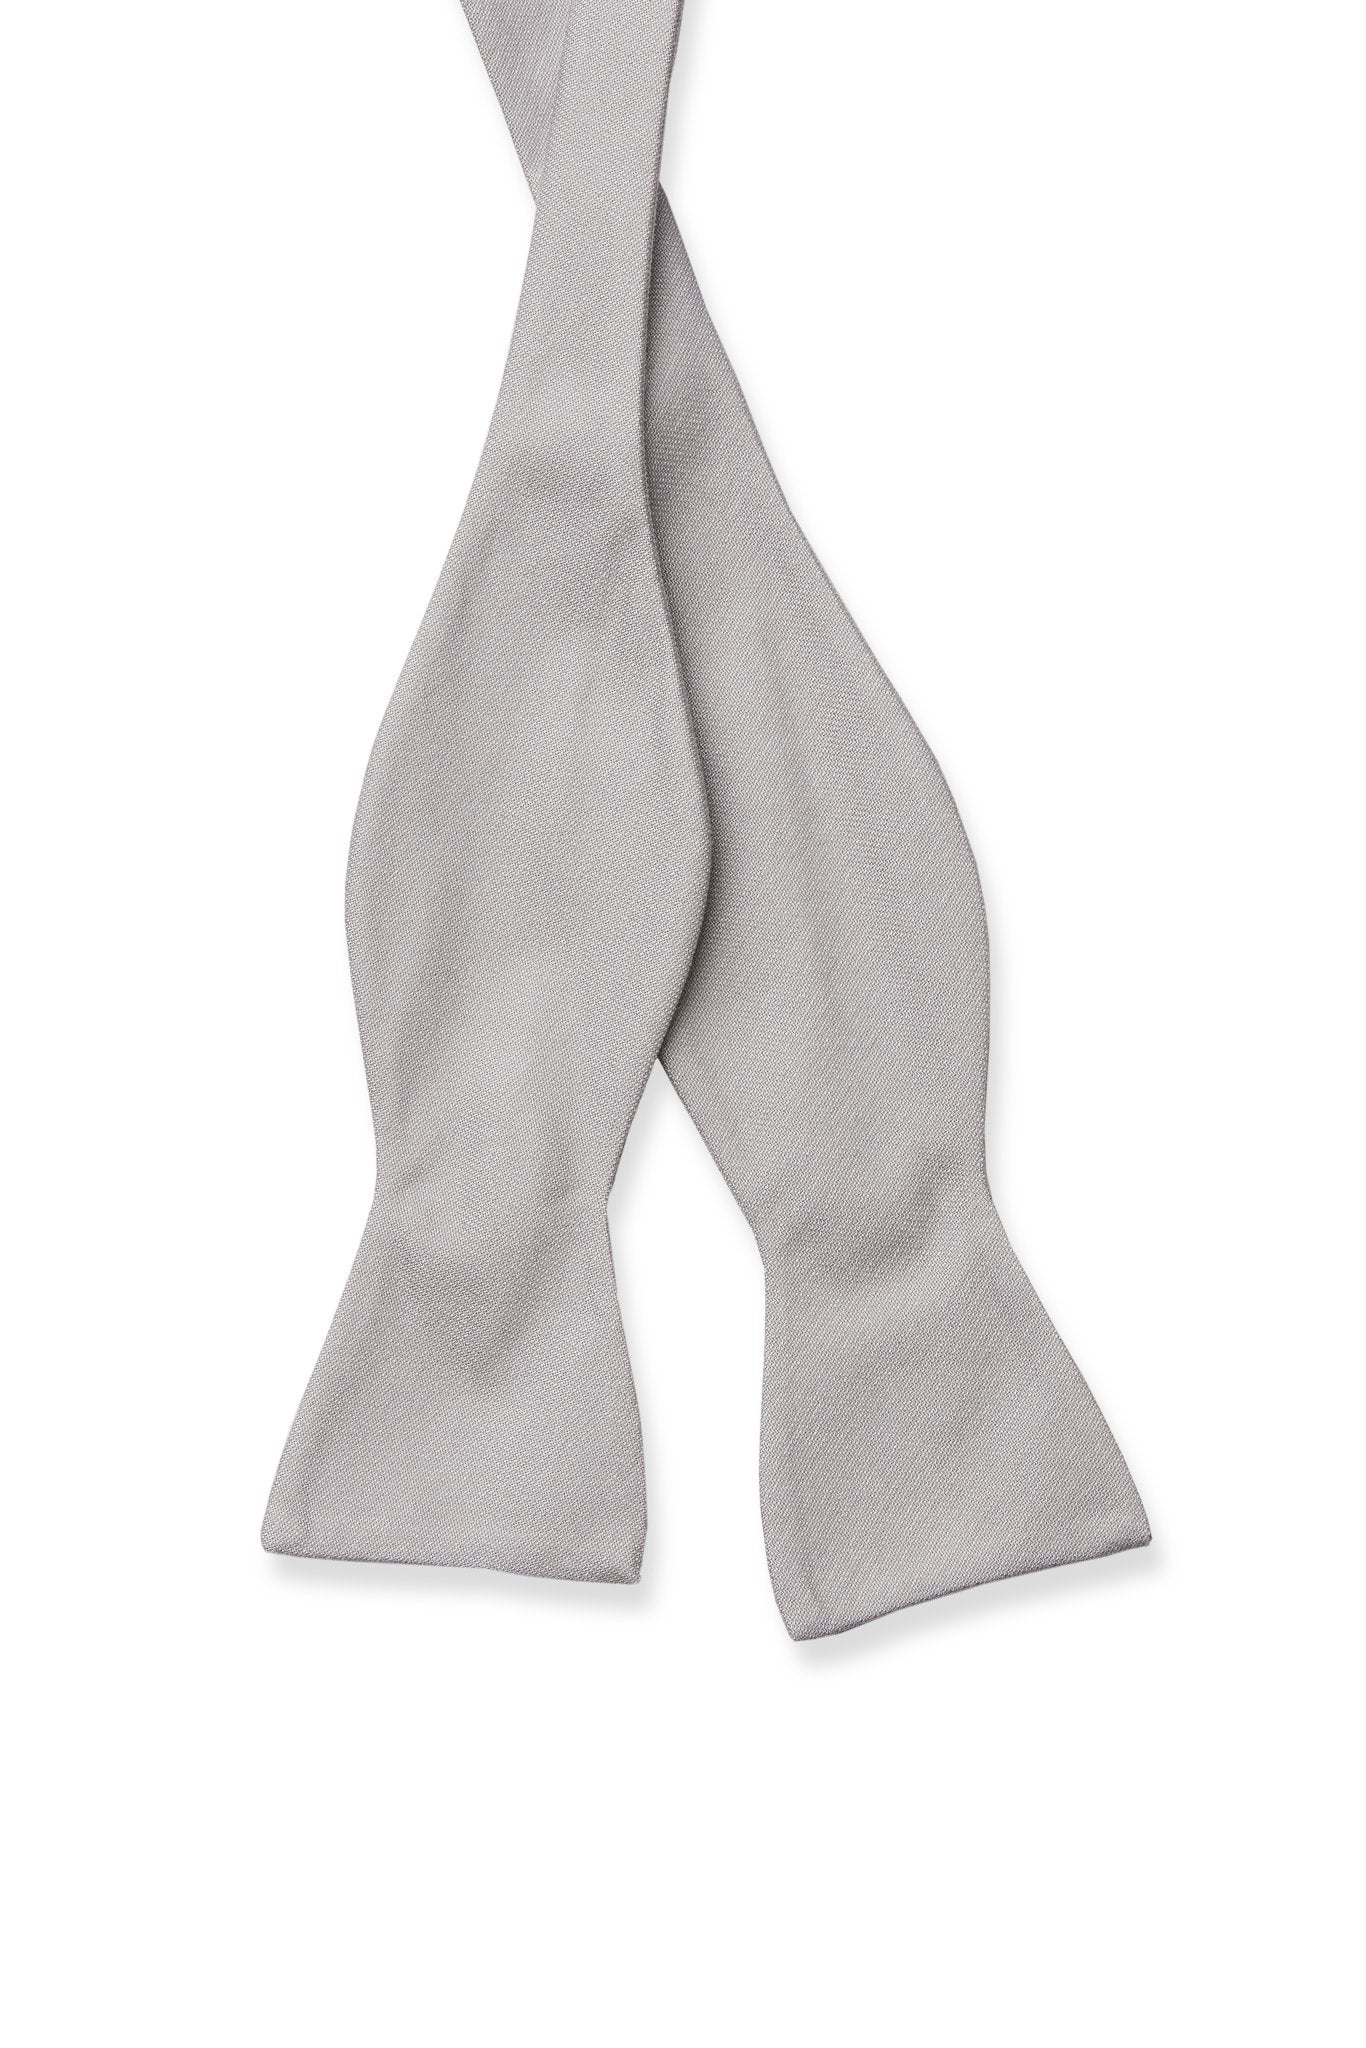 Daniel Bow Tie in dove gray by Birdy Grey, front view